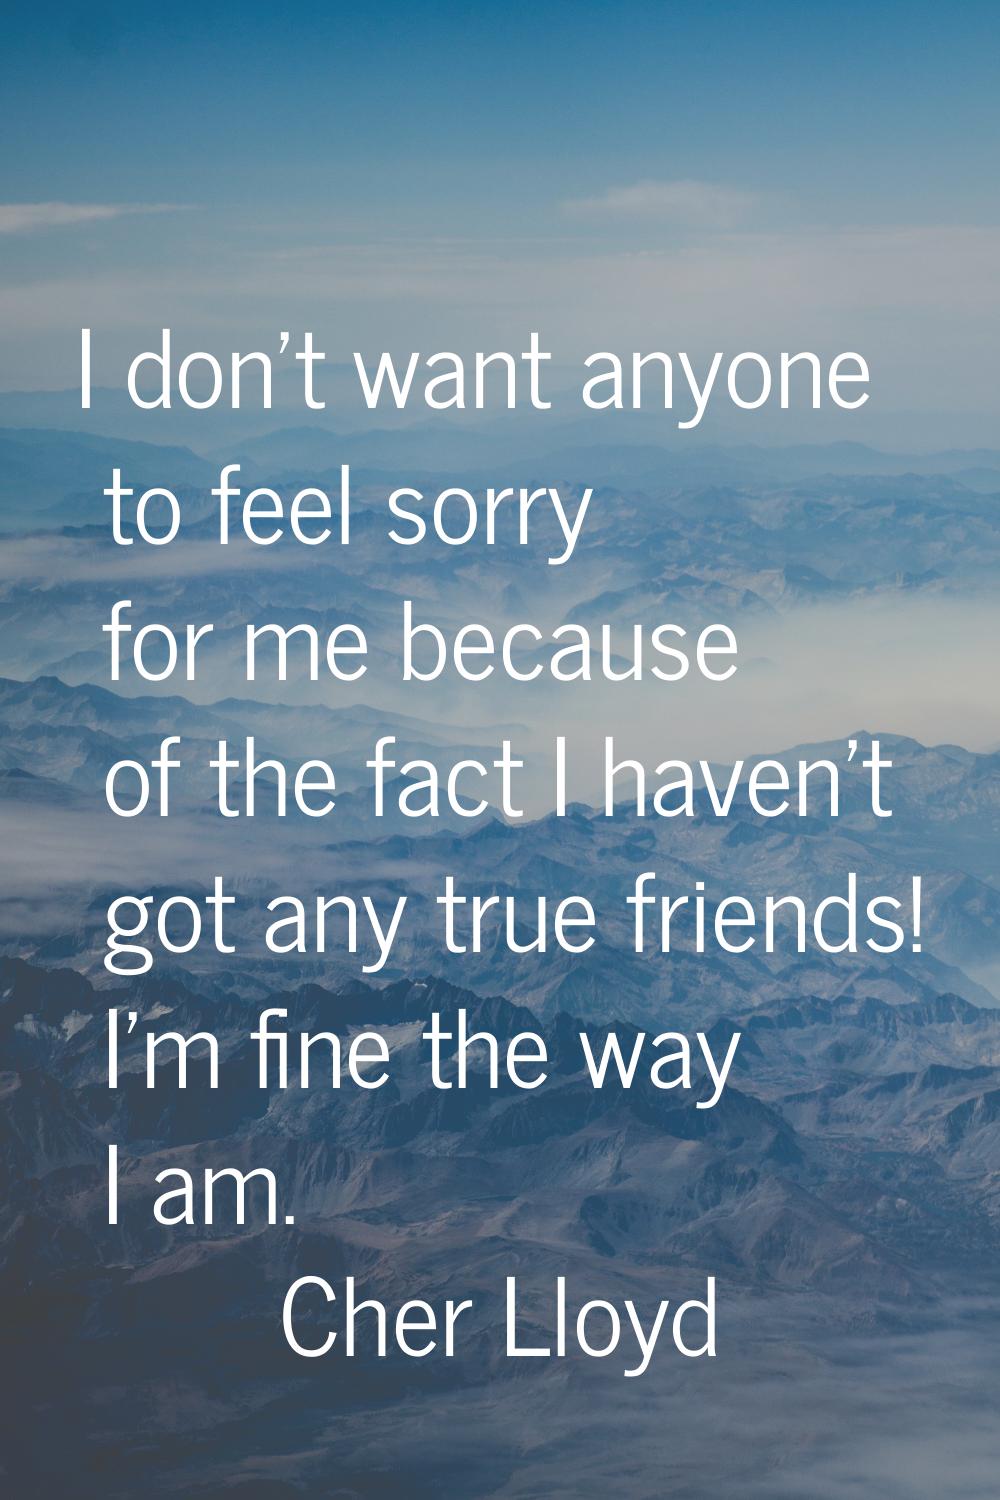 I don't want anyone to feel sorry for me because of the fact I haven't got any true friends! I'm fi